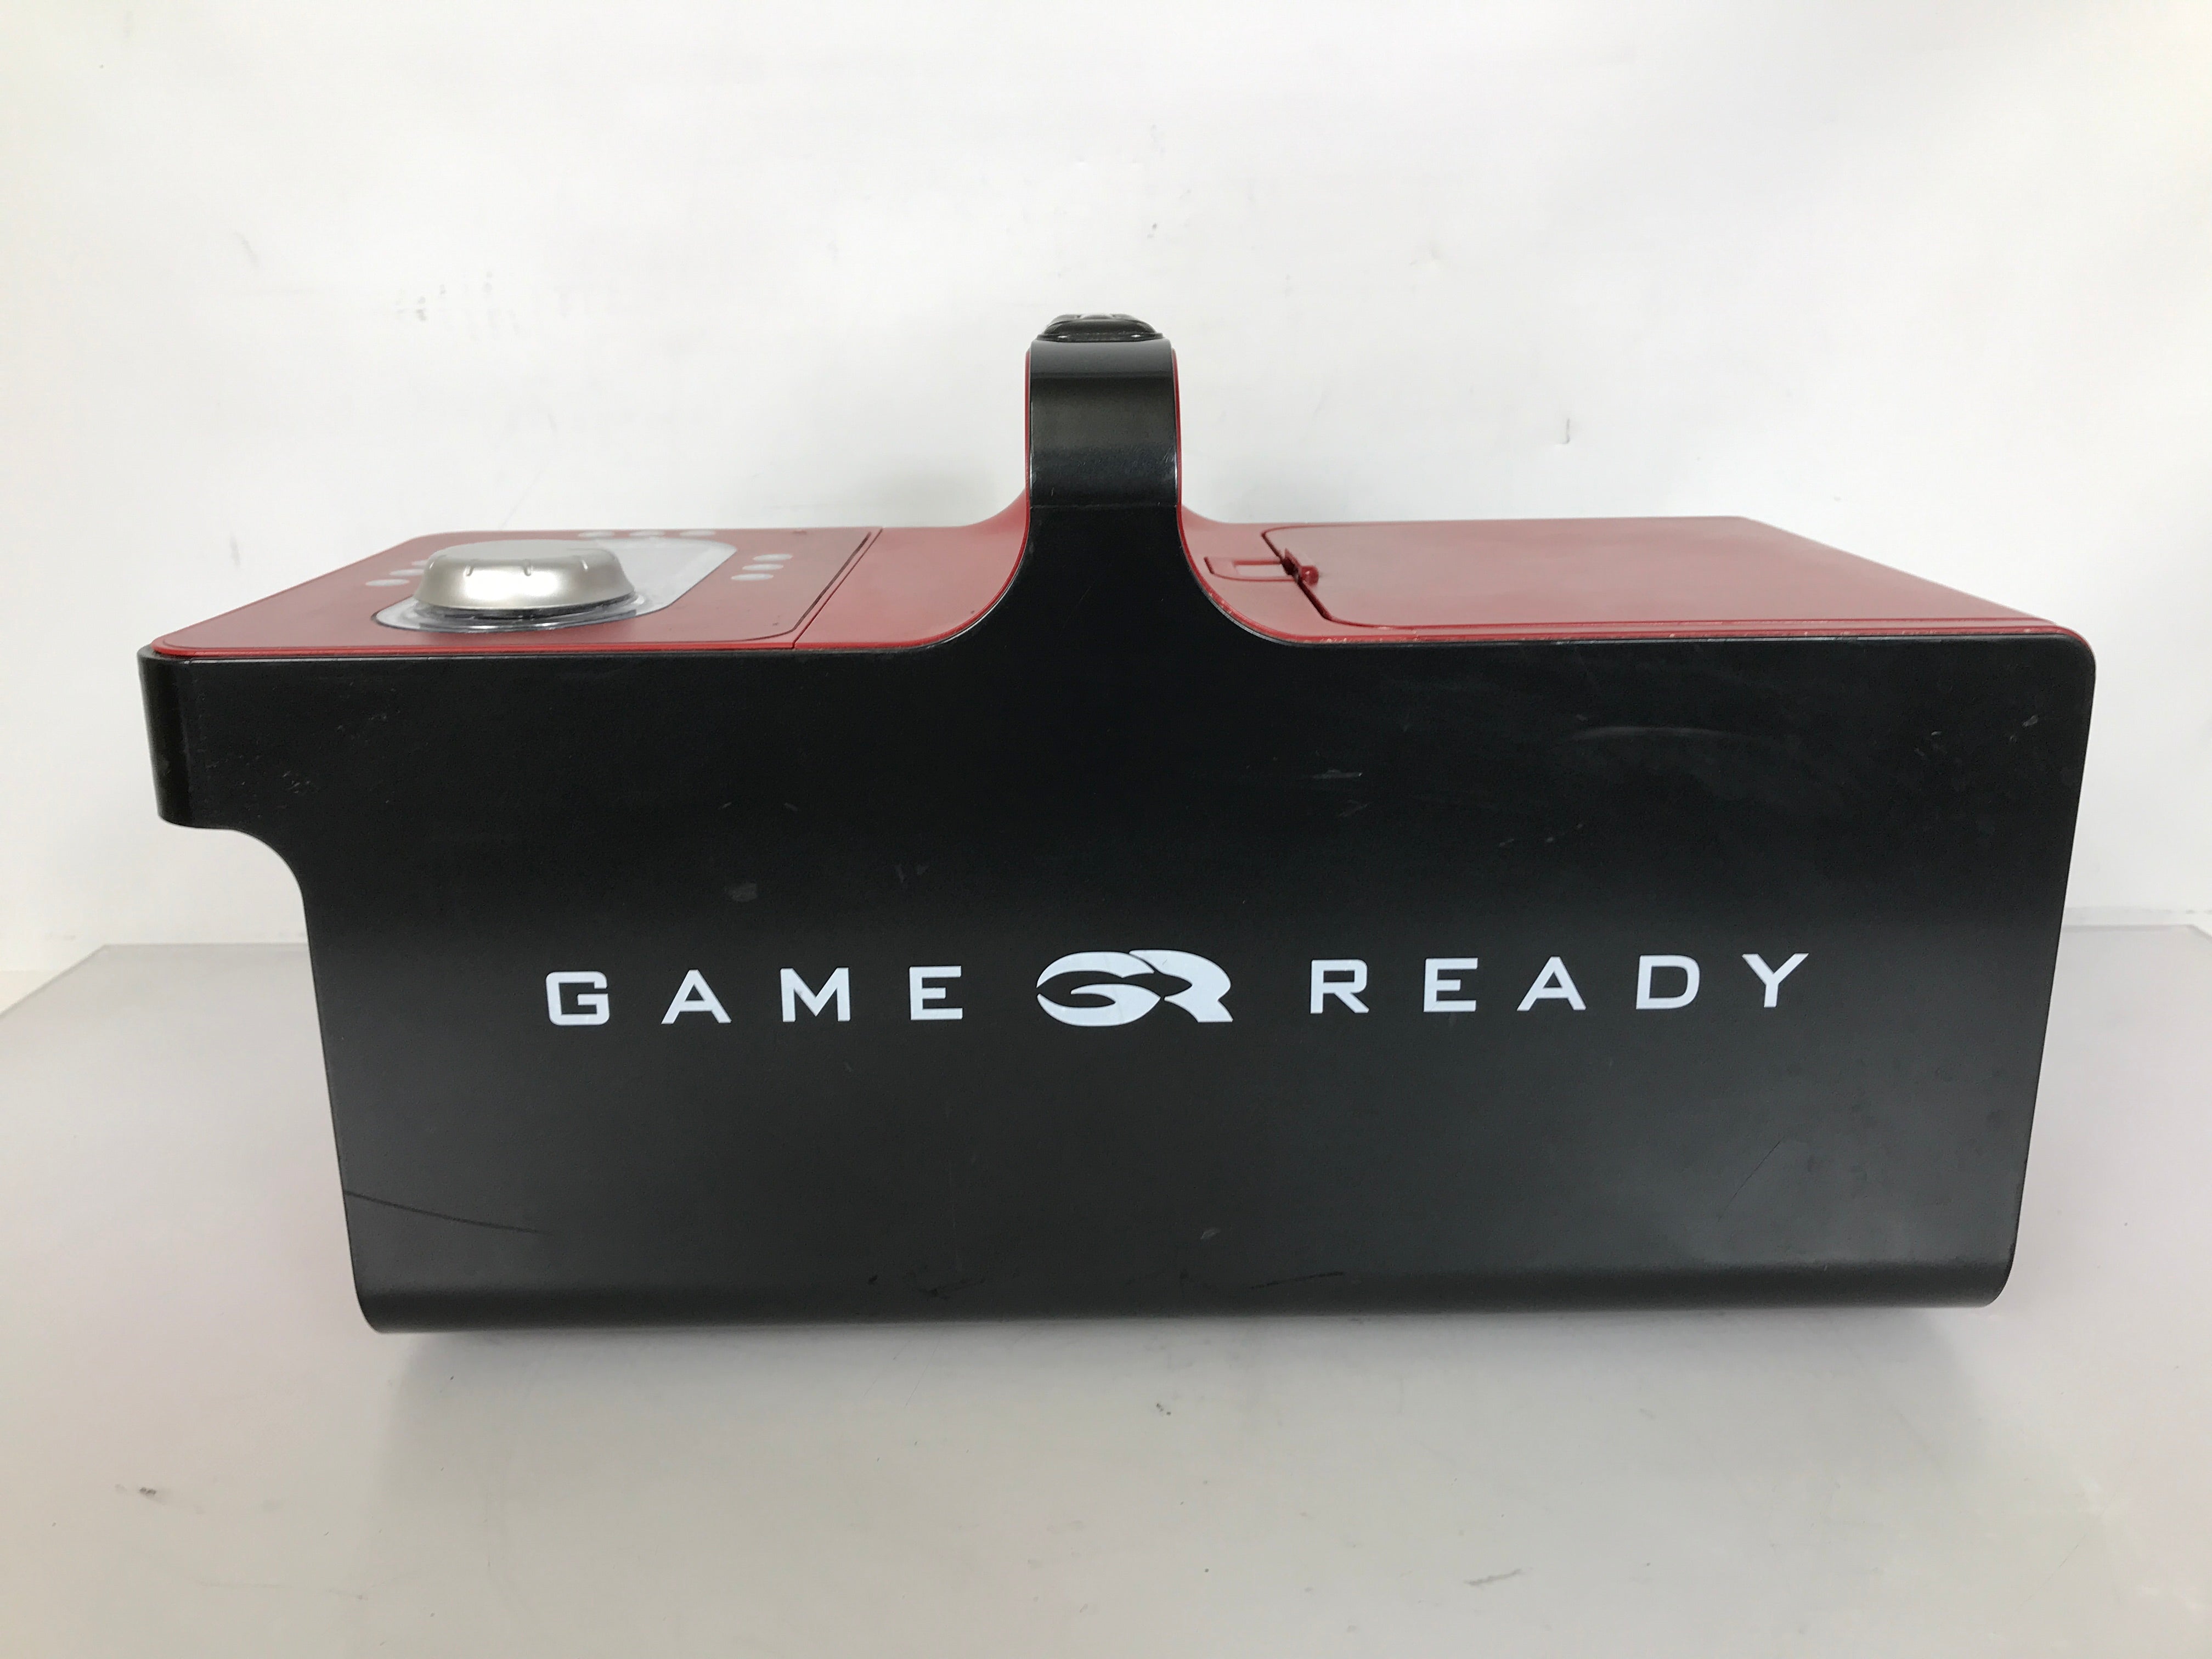 Game Ready GRPro 2.1 Cold and Compression Therapy Control Unit